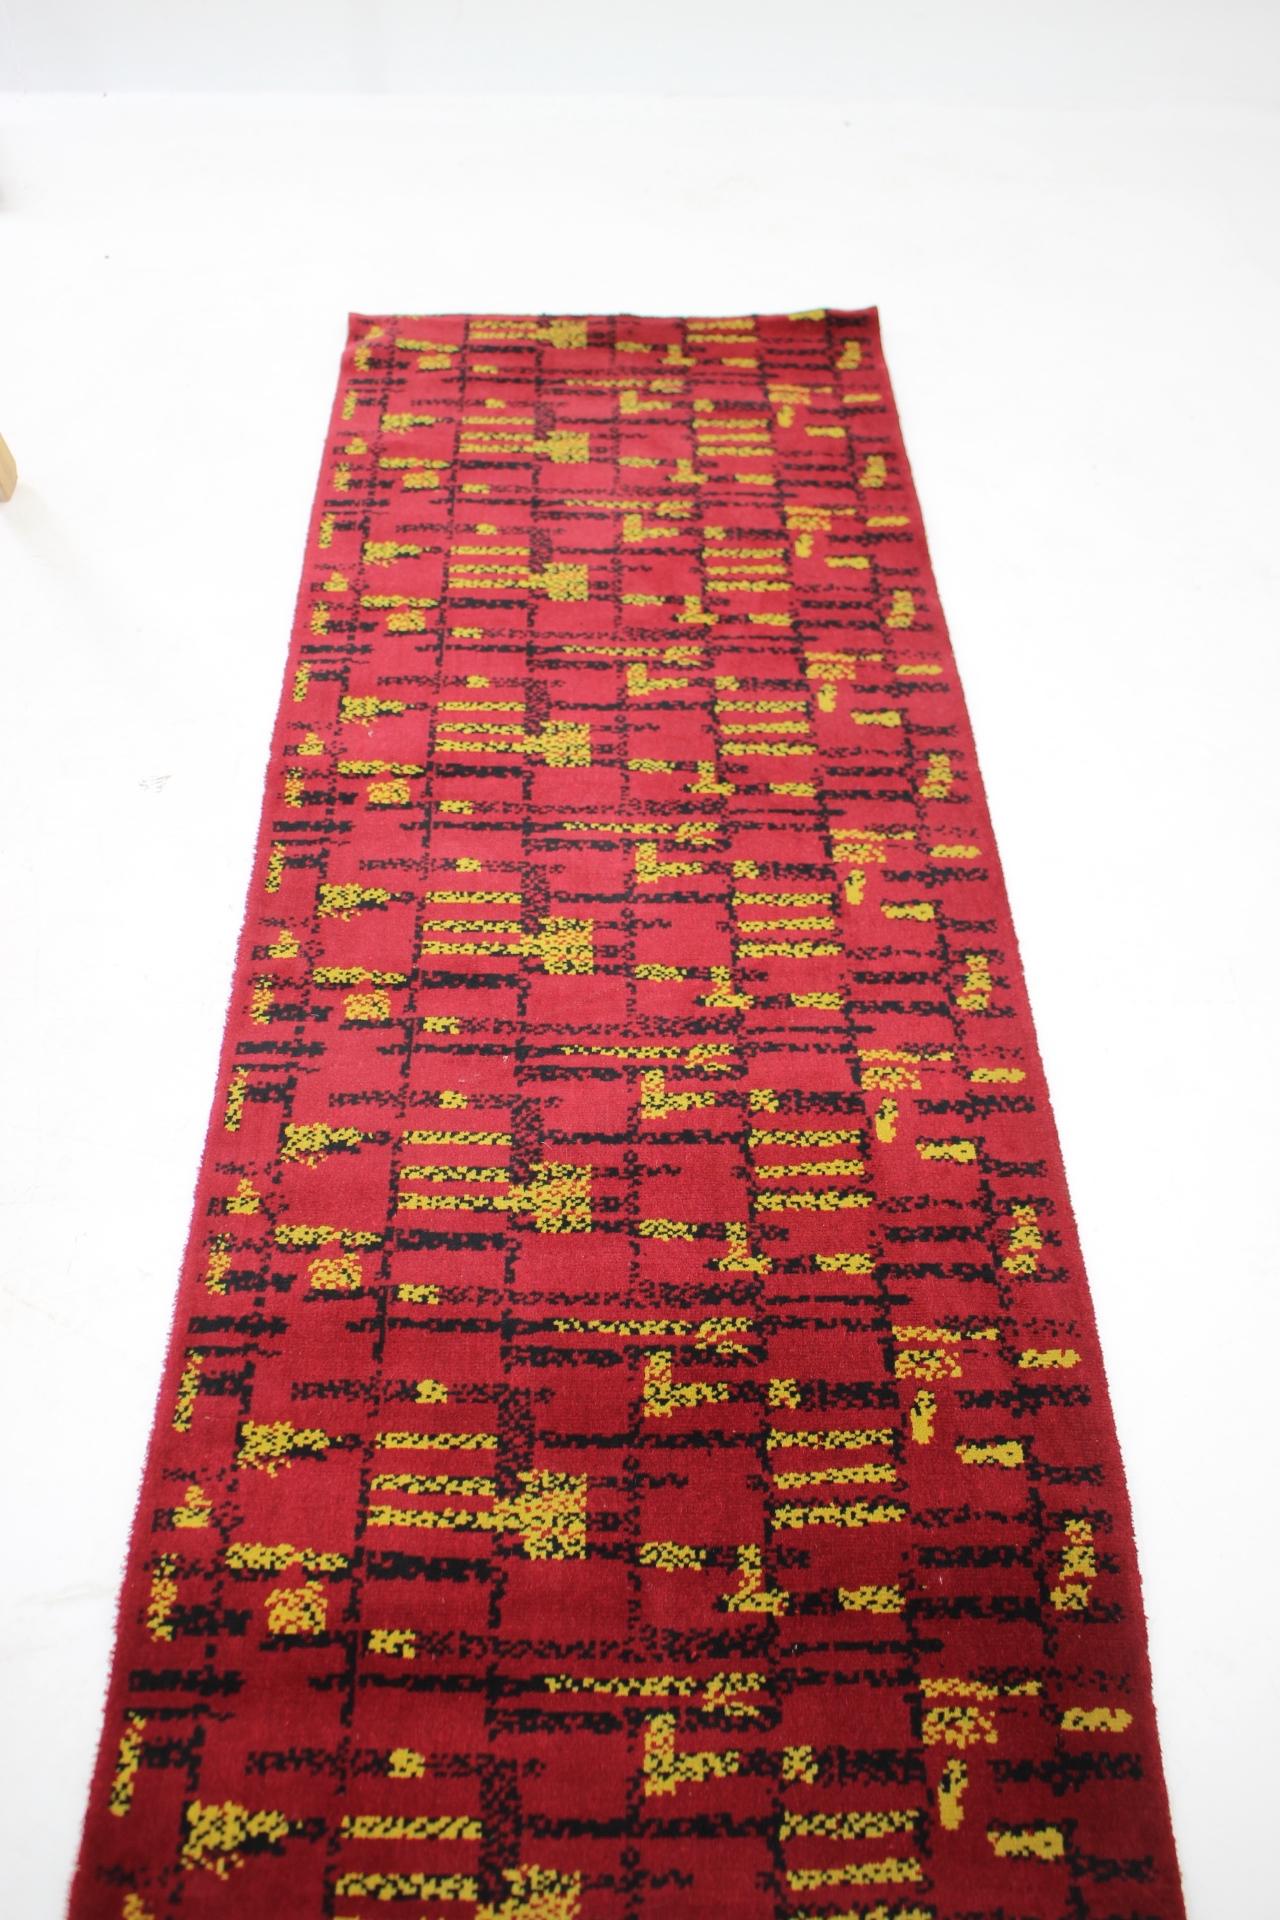 Geometric Abstract Wool Bouclé Carpet / Rug-1950s / Czechoslovakia In Good Condition For Sale In Praha, CZ